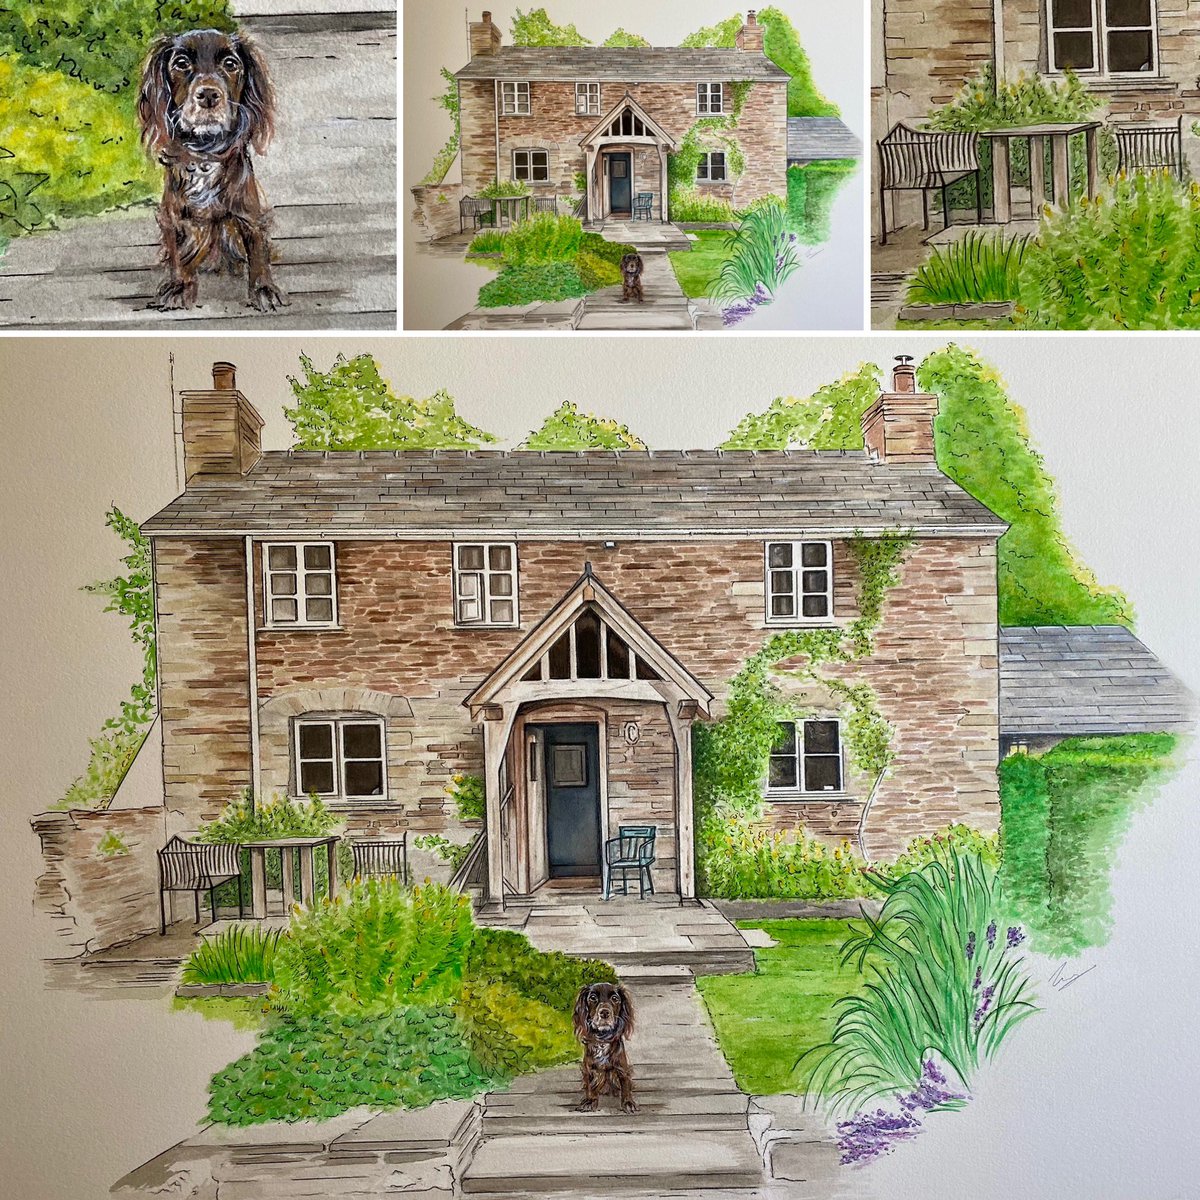 Meet ‘Fluff’ outside her holiday cottage! Loved #drawing this as a #surprisepresent #DogsofTwittter #cutedog #cottageart #artistsontwitter #Watercolour #painting #art #idea #uniquegifts #drawmyhouse #sketch